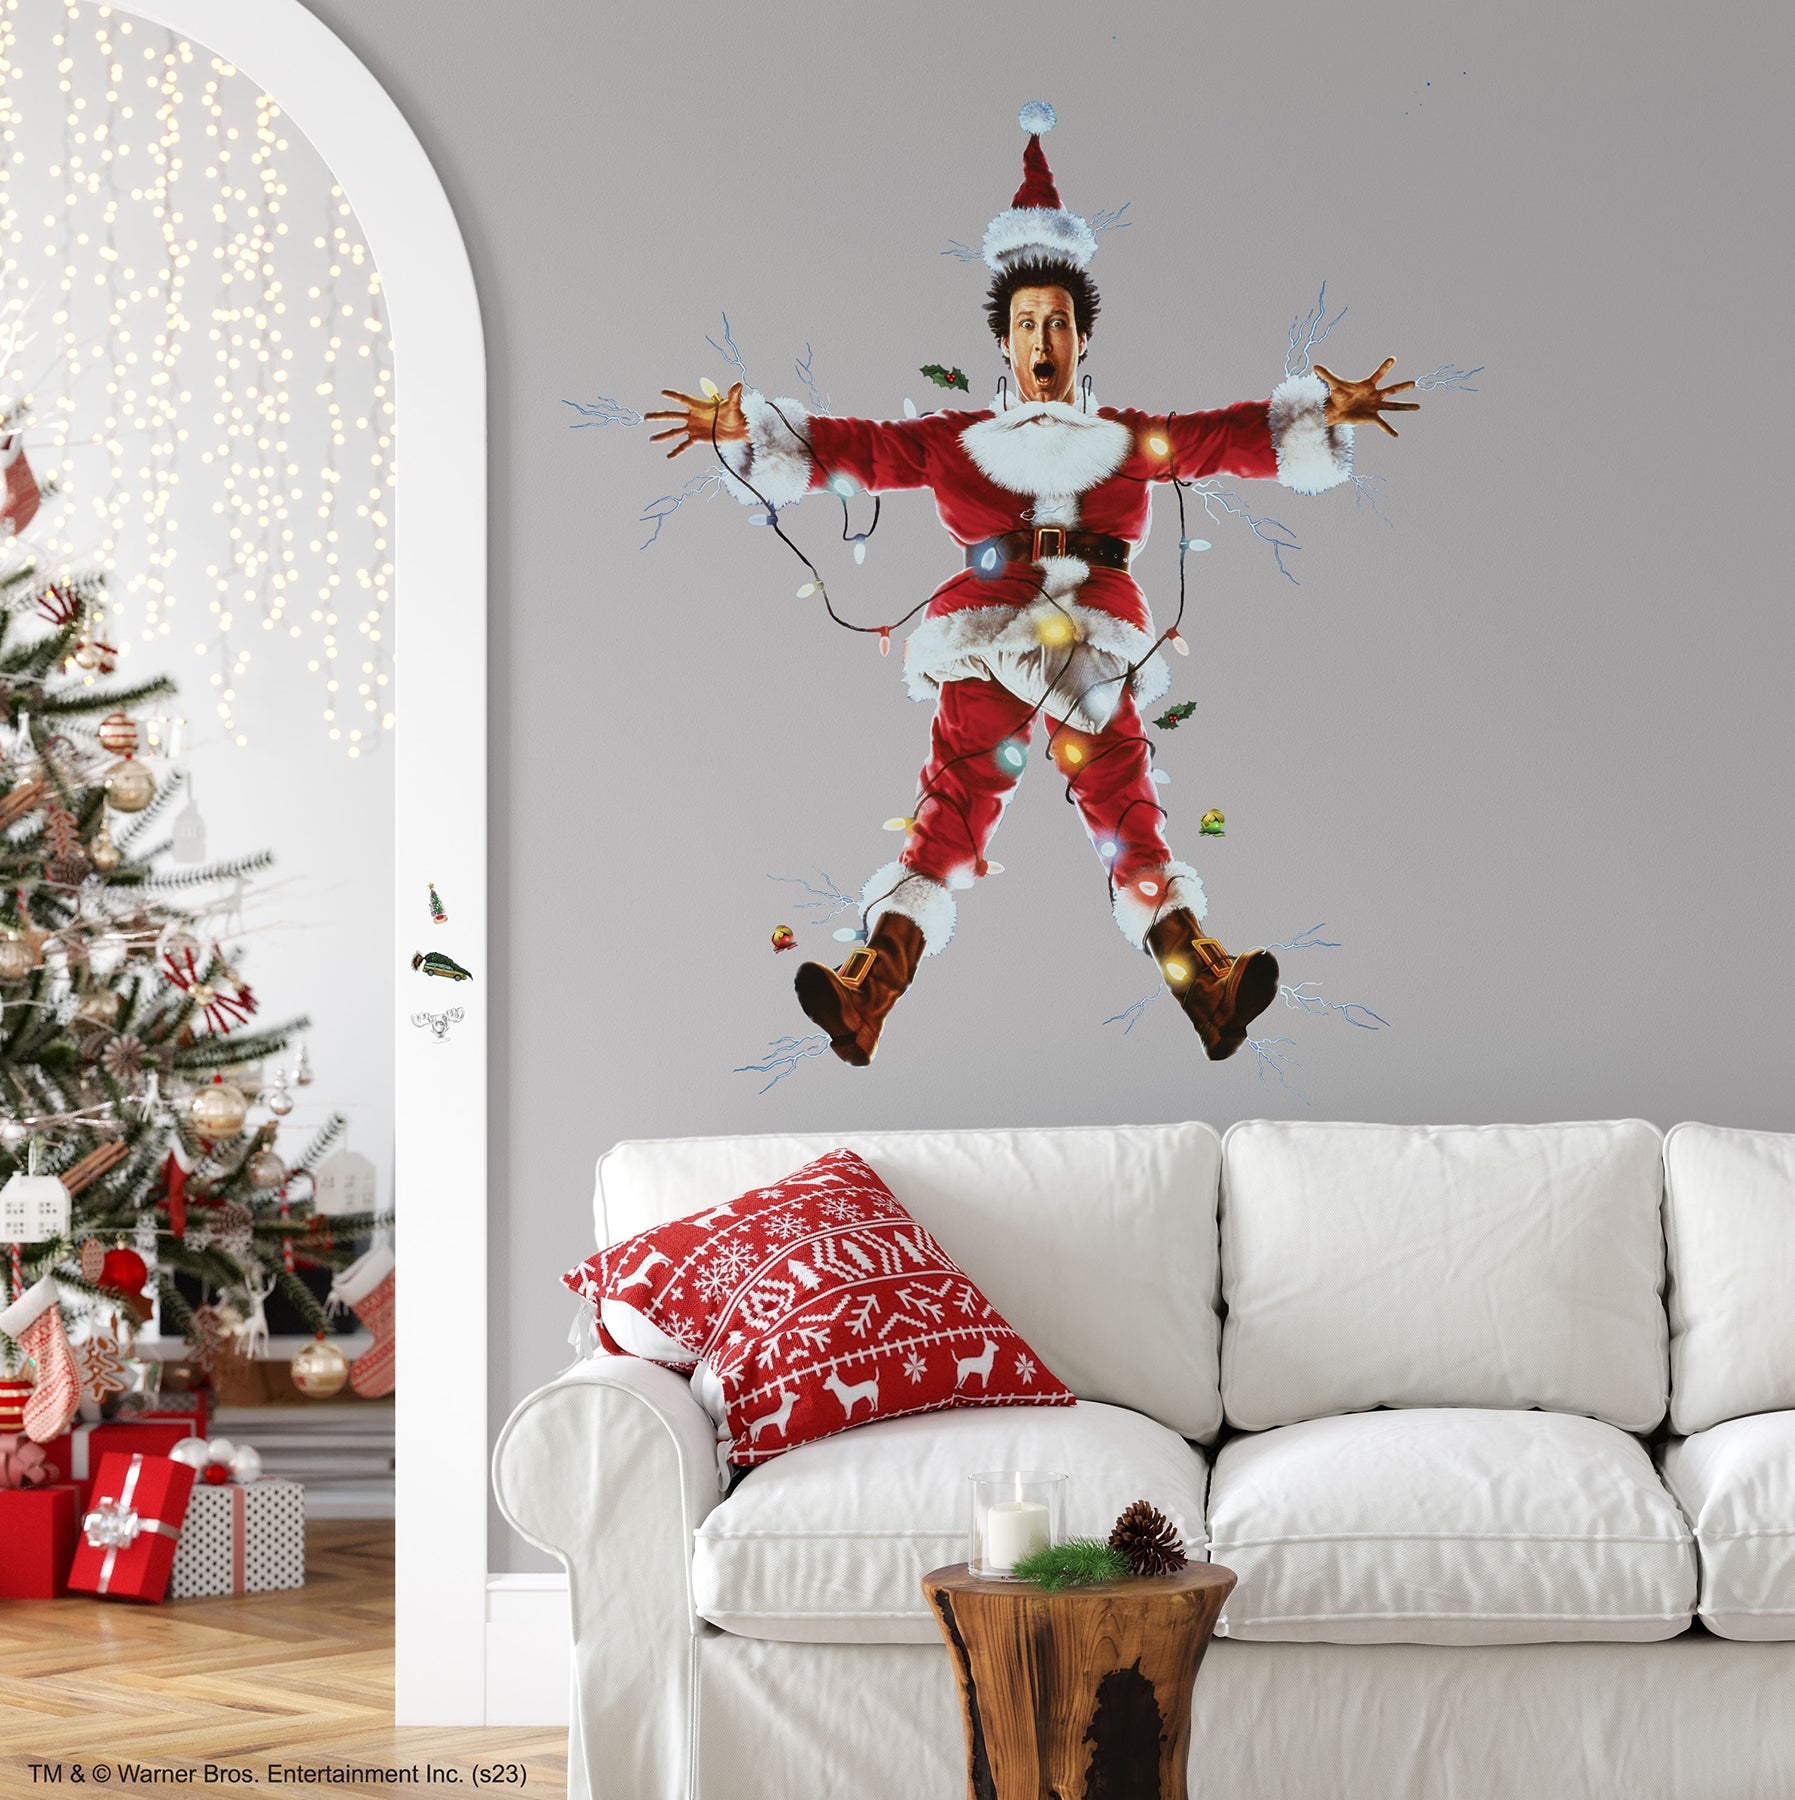 National Lampoon's Christmas Vacation Giant Wall Decals Wall Decals RoomMates   